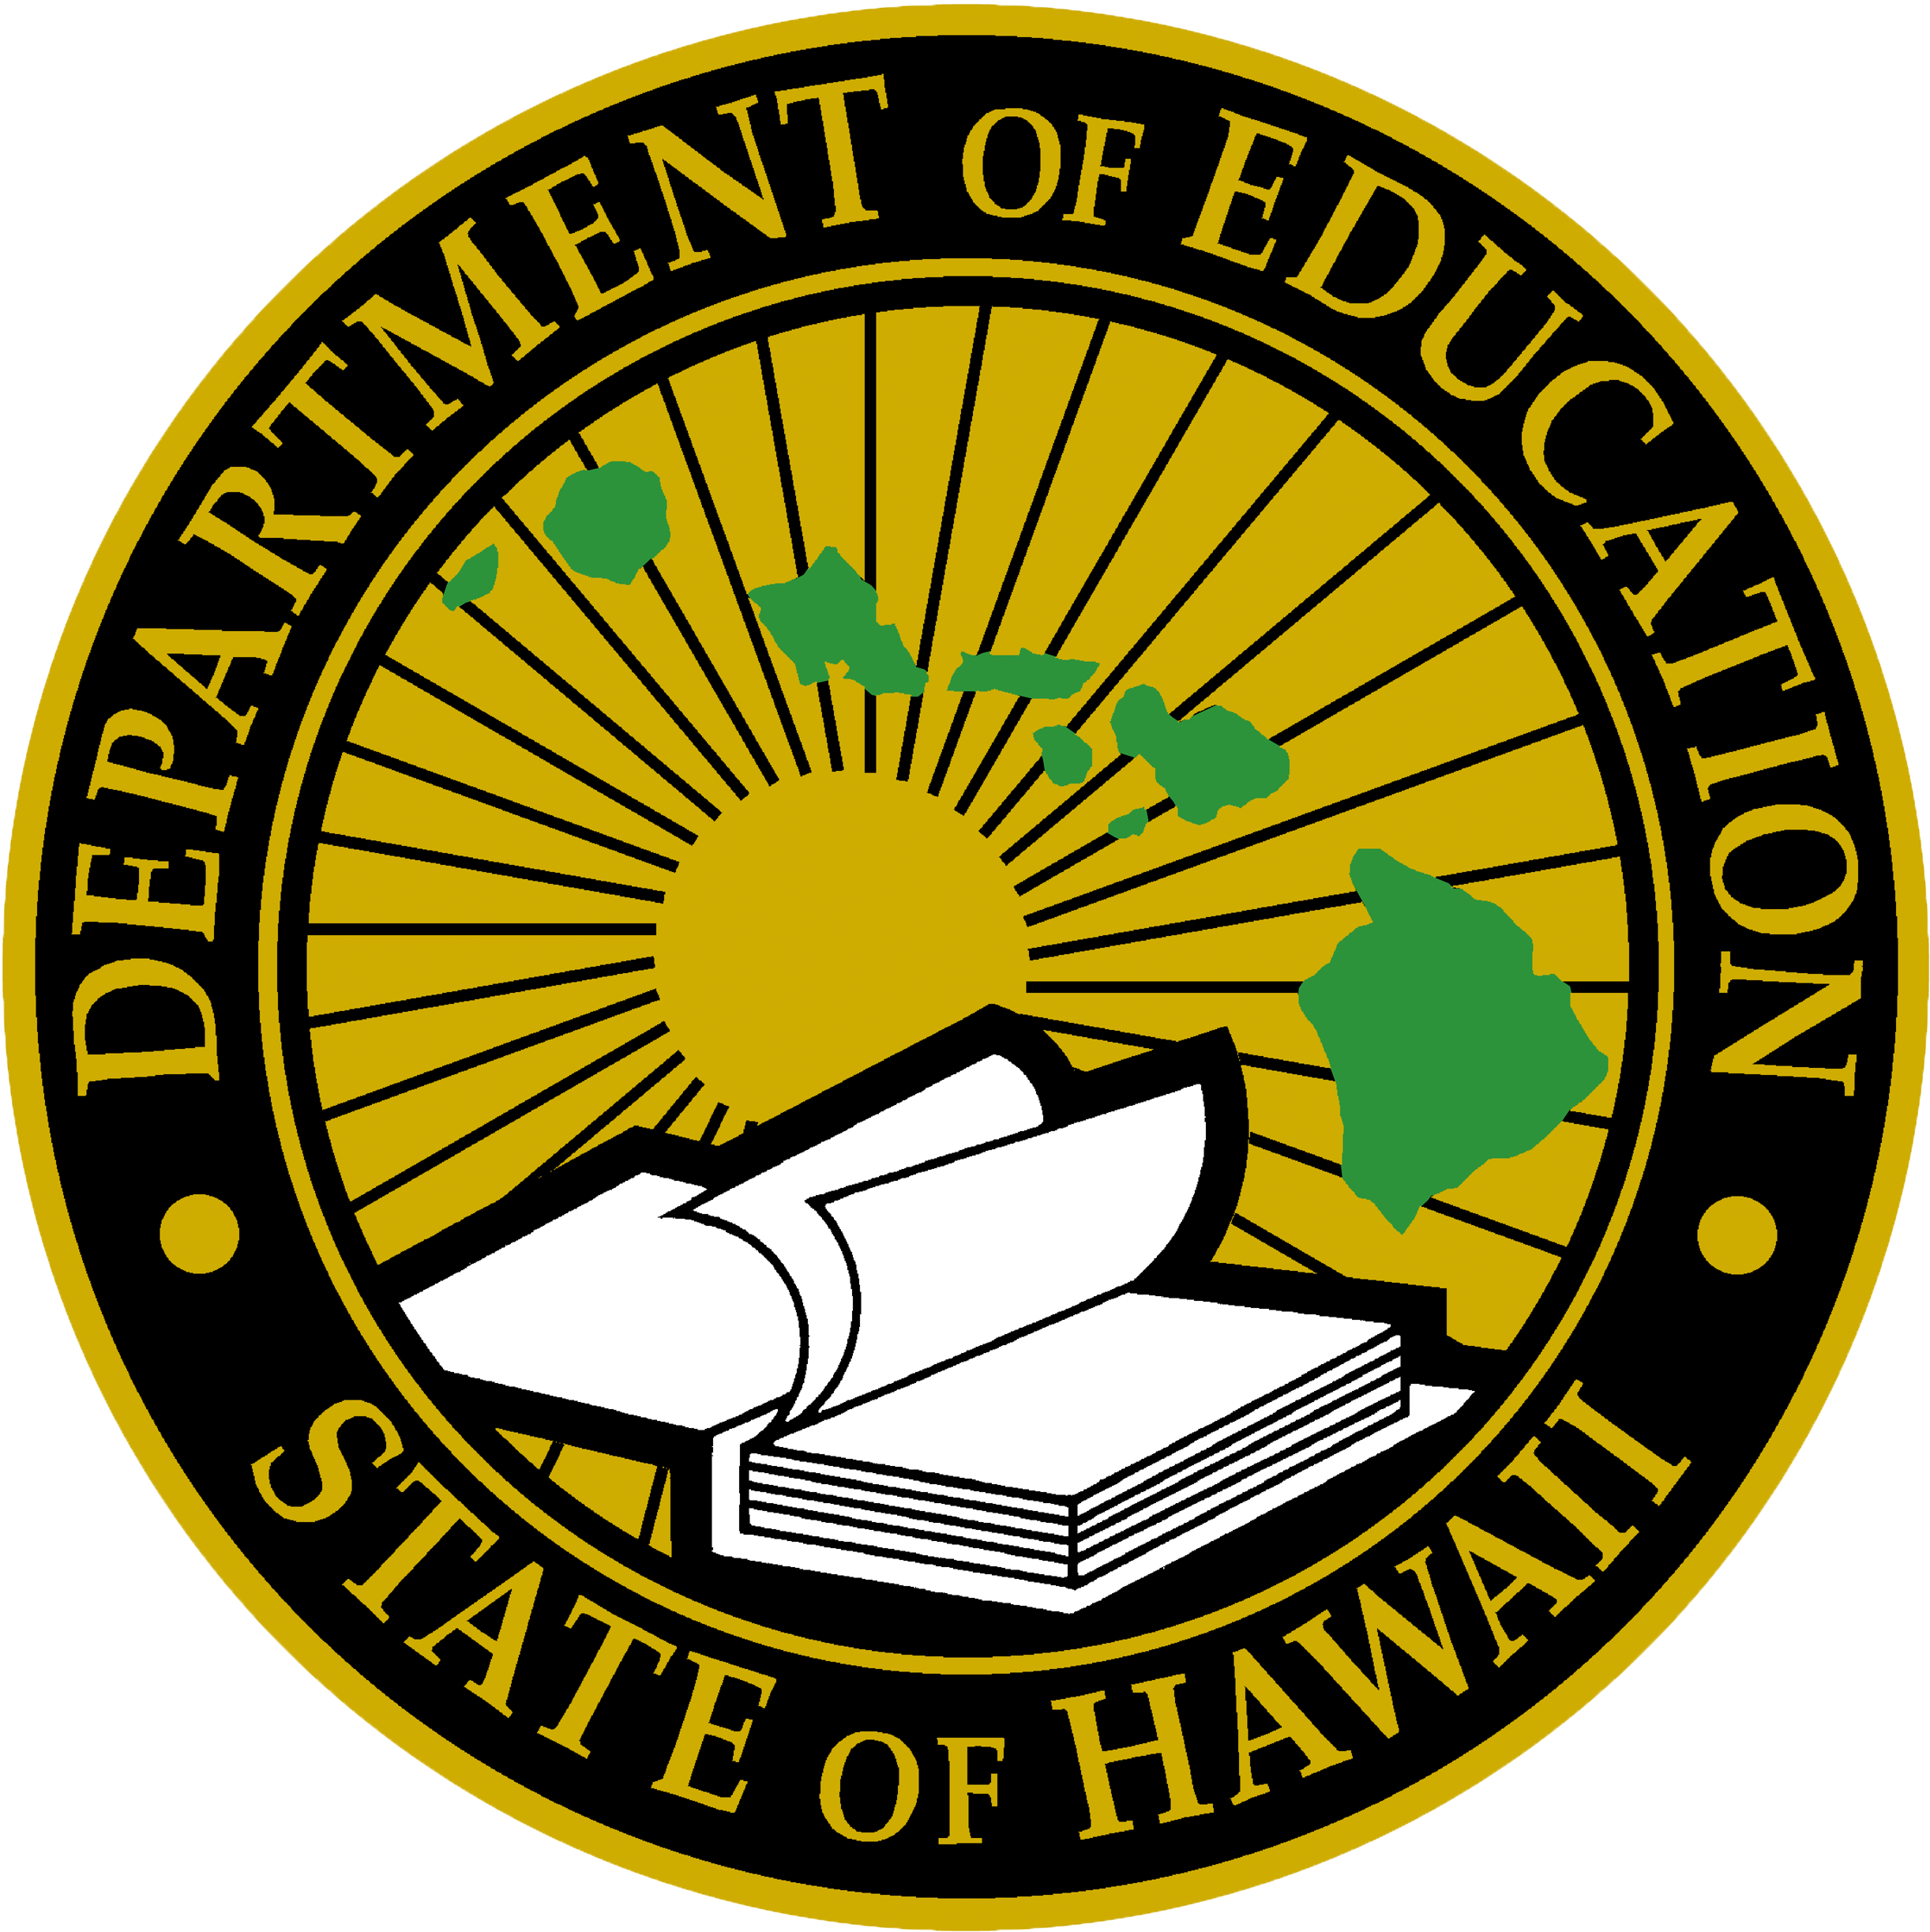  Personalized video reports that communicate assessment results to students and parents over their computers or mobile phones --  with a very Hawaii flavor . 